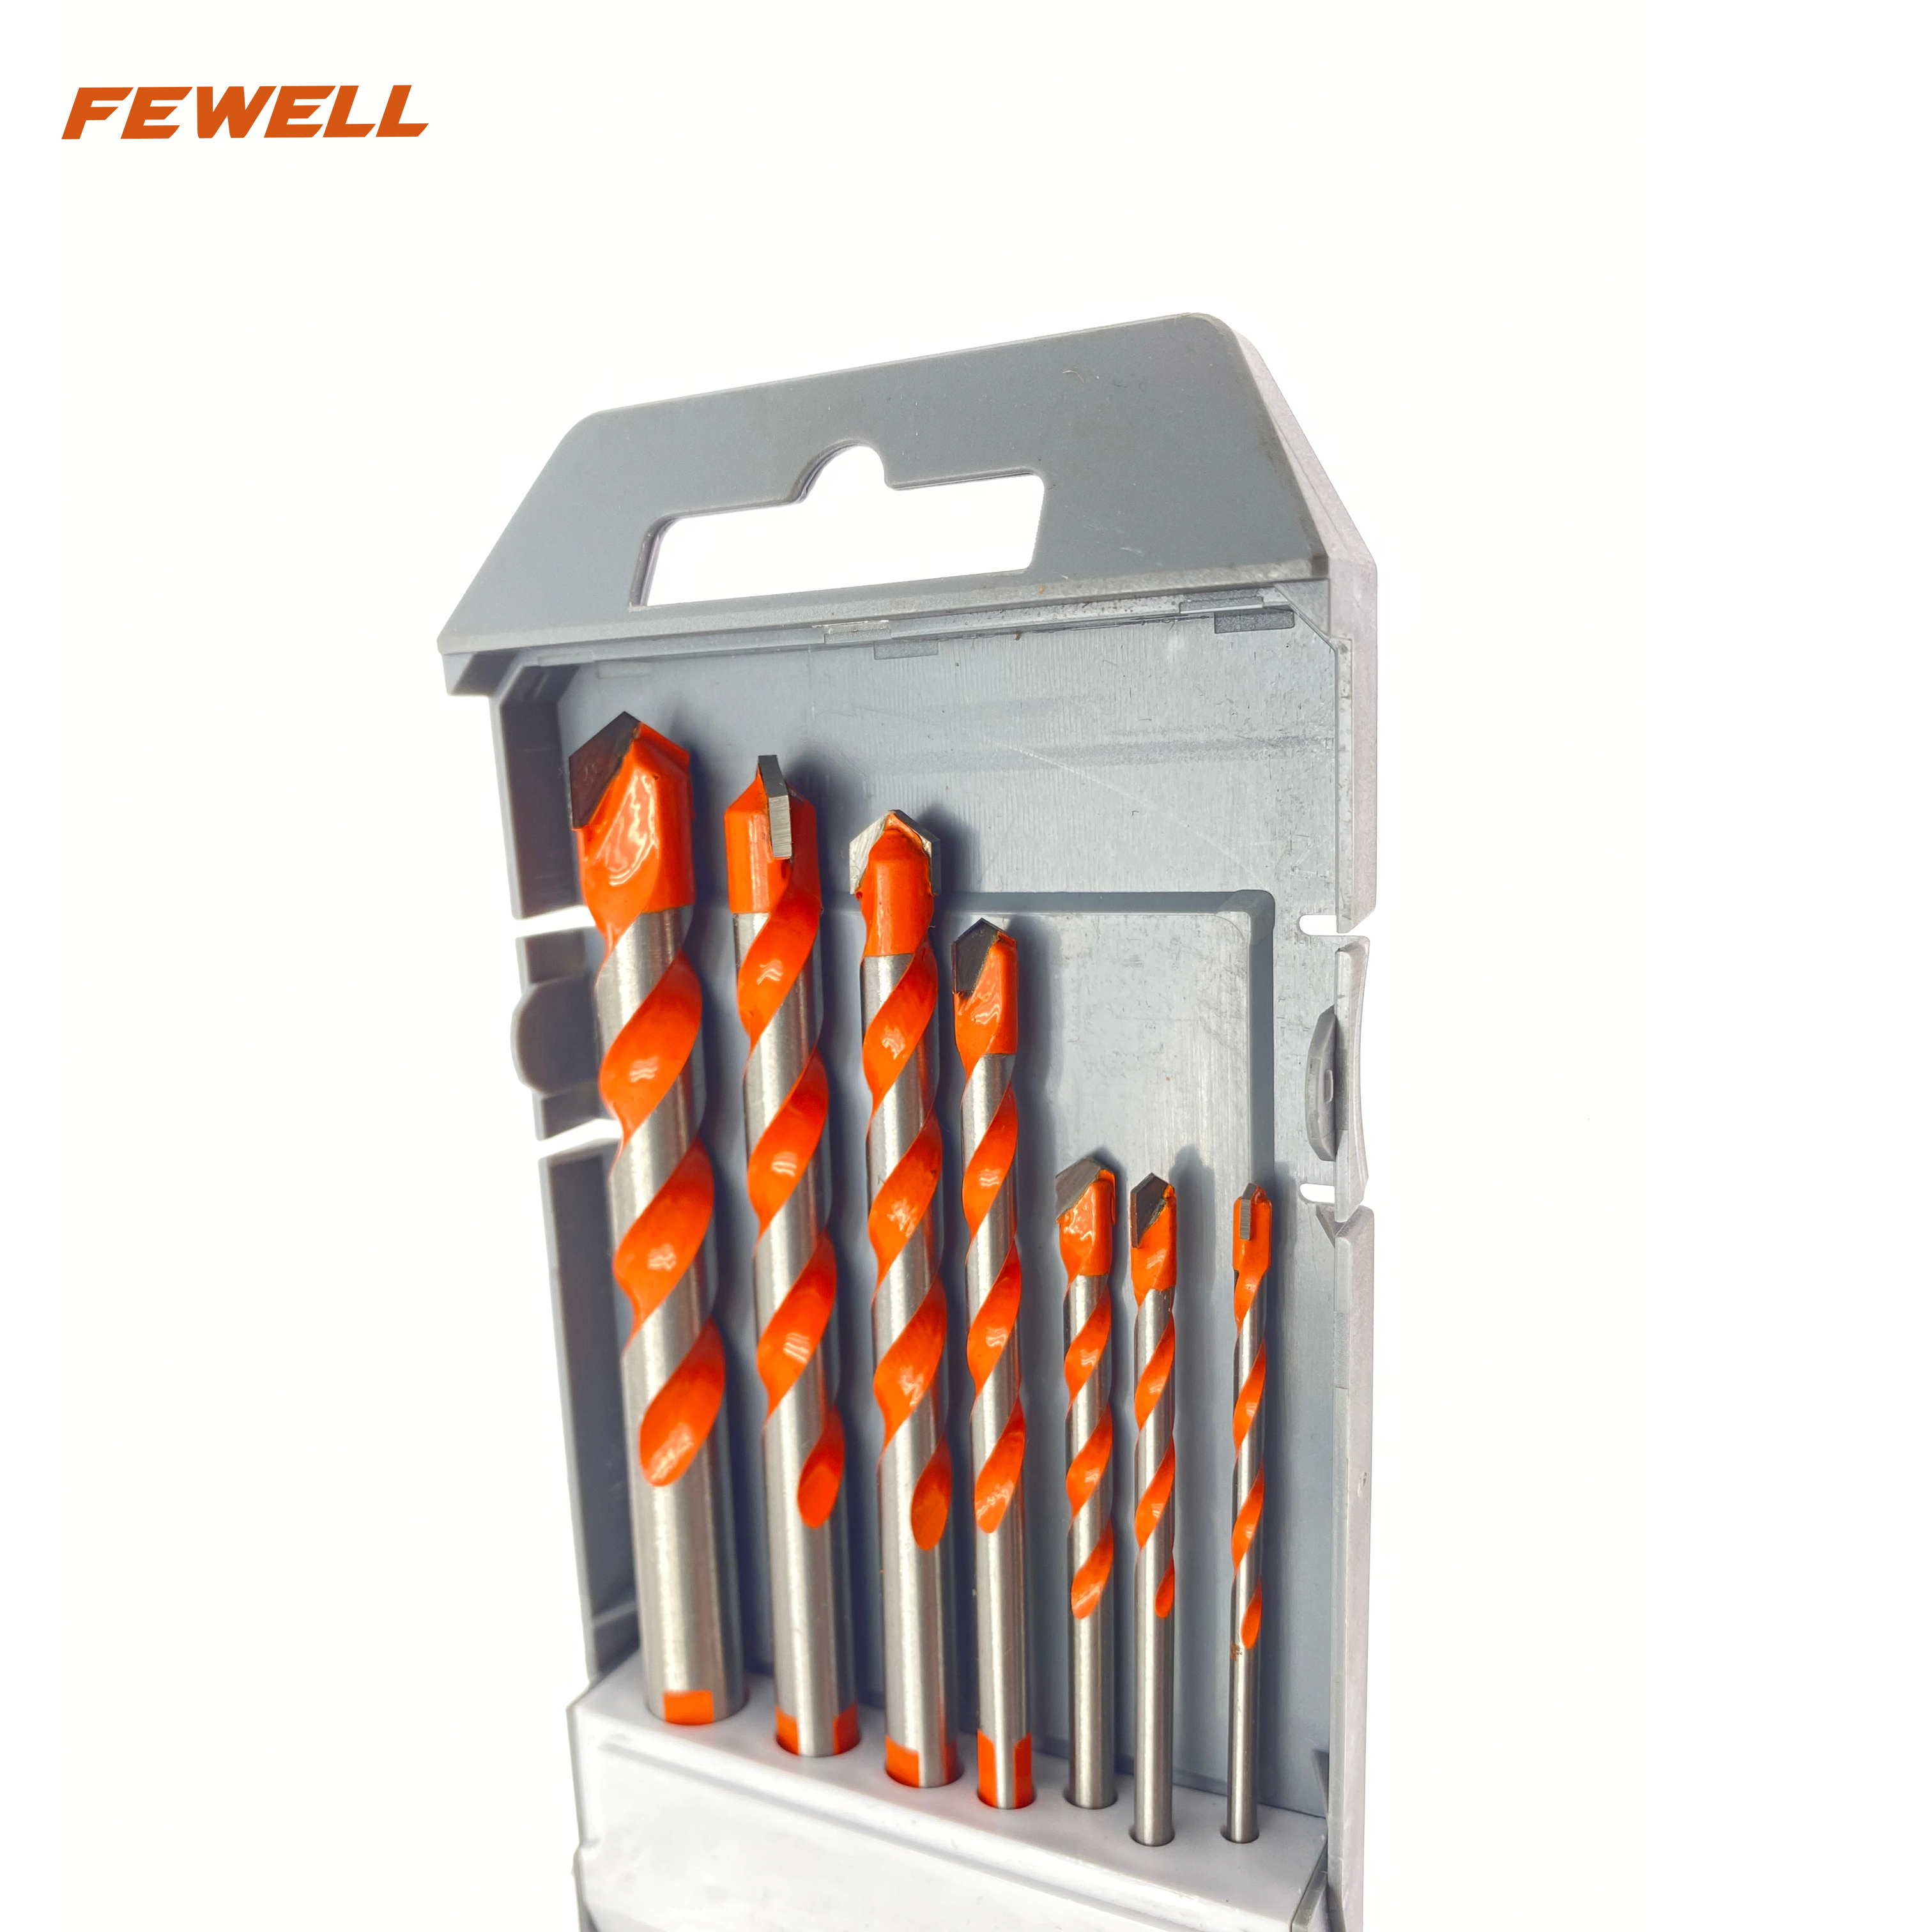 High quality 7pcs(3mm,4mm,5mm,6mm,8mm,10mm,12mm) Triangle handle spiral multifunction drill bit general purpose